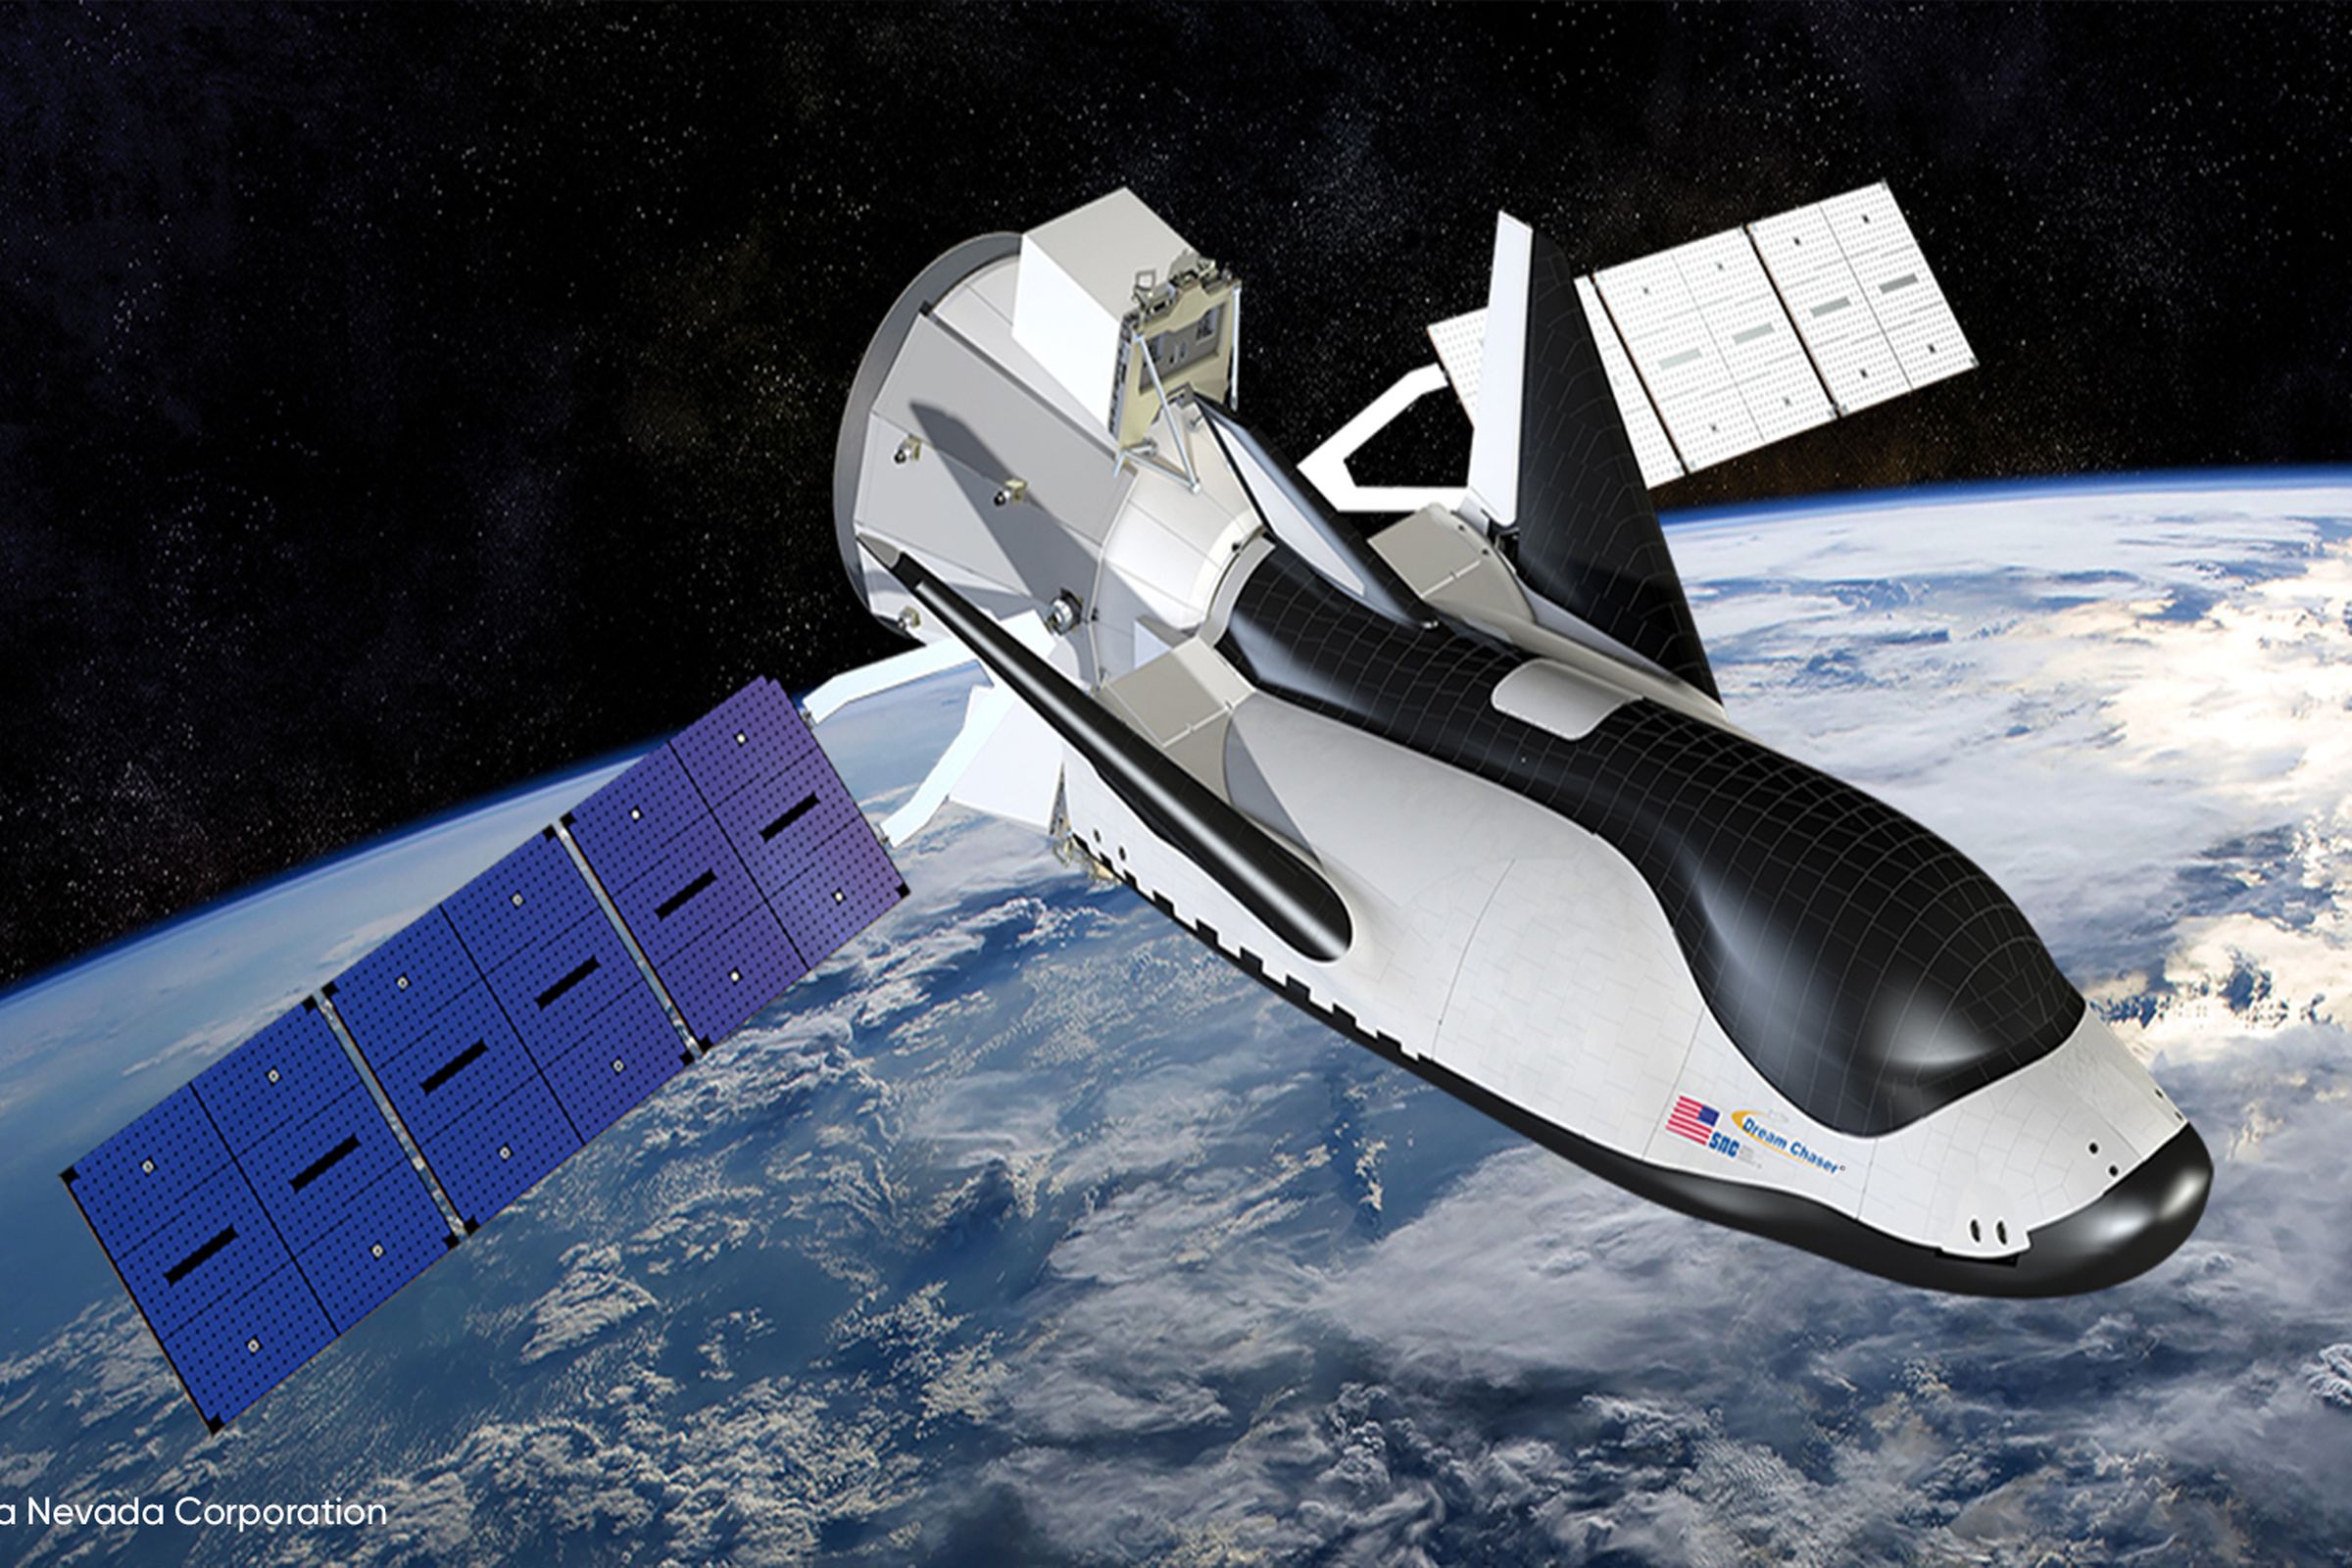 A rendering of SNC’s Dream Chaser vehicle in space